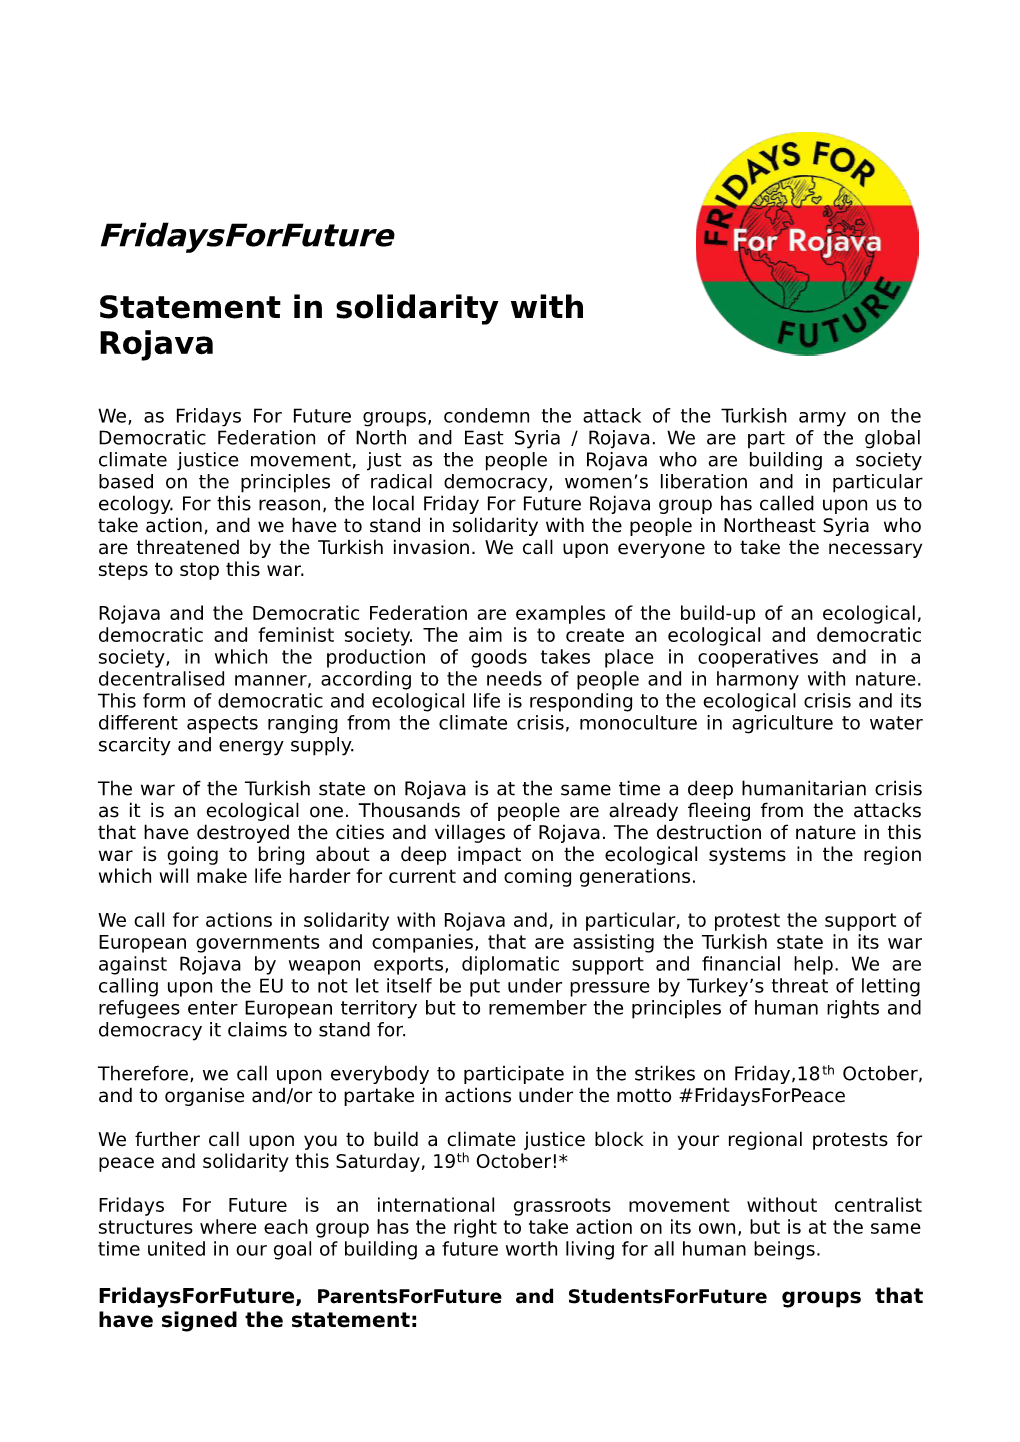 Fridaysforfuture Statement in Solidarity with Rojava